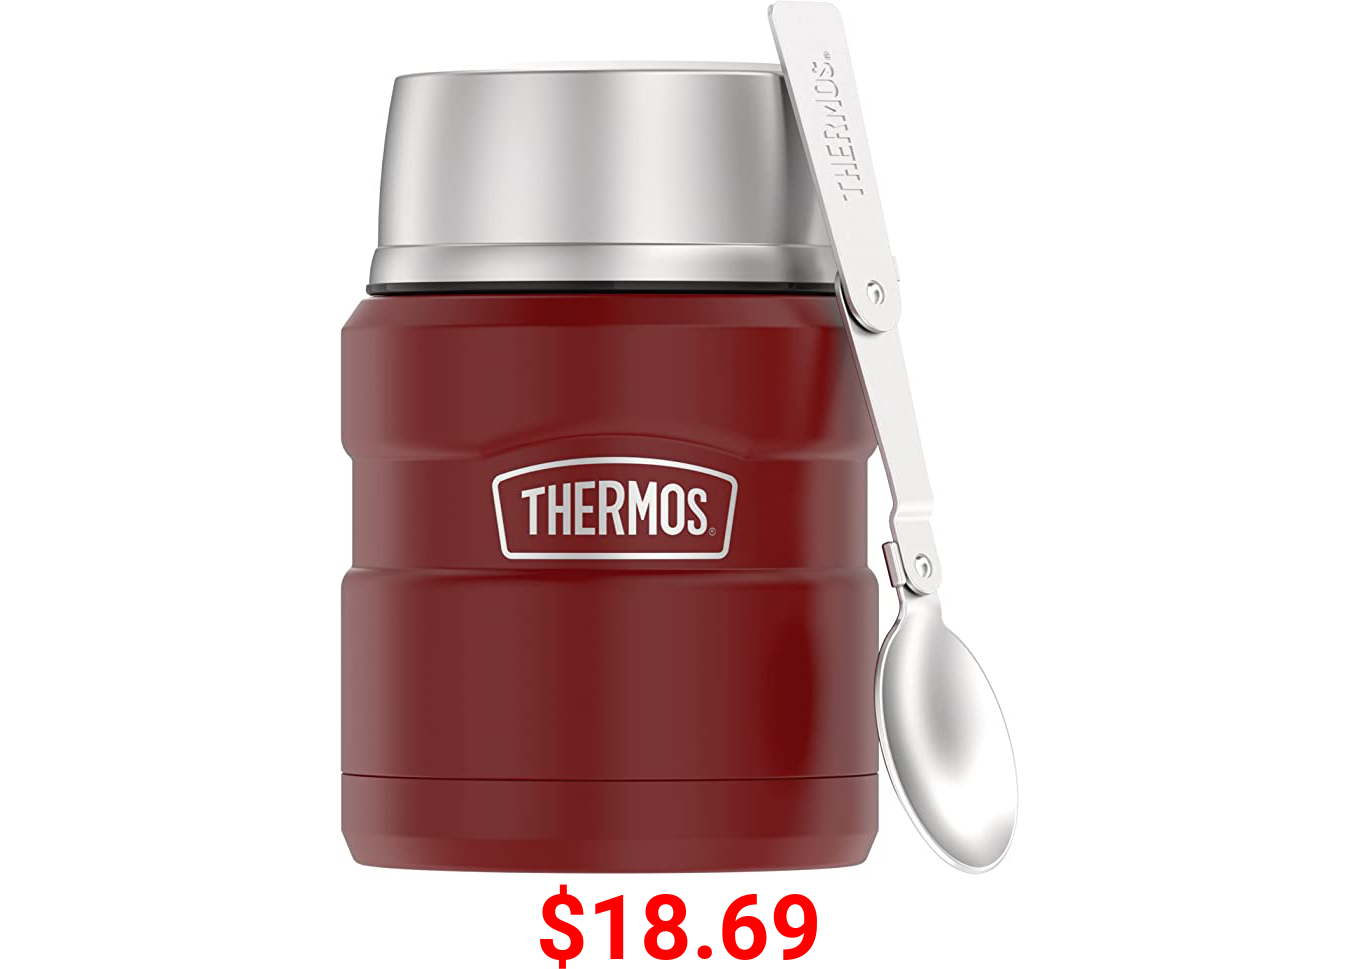 THERMOS Stainless King Vacuum-Insulated Food Jar with Spoon, 16 Ounce, Rustic Red